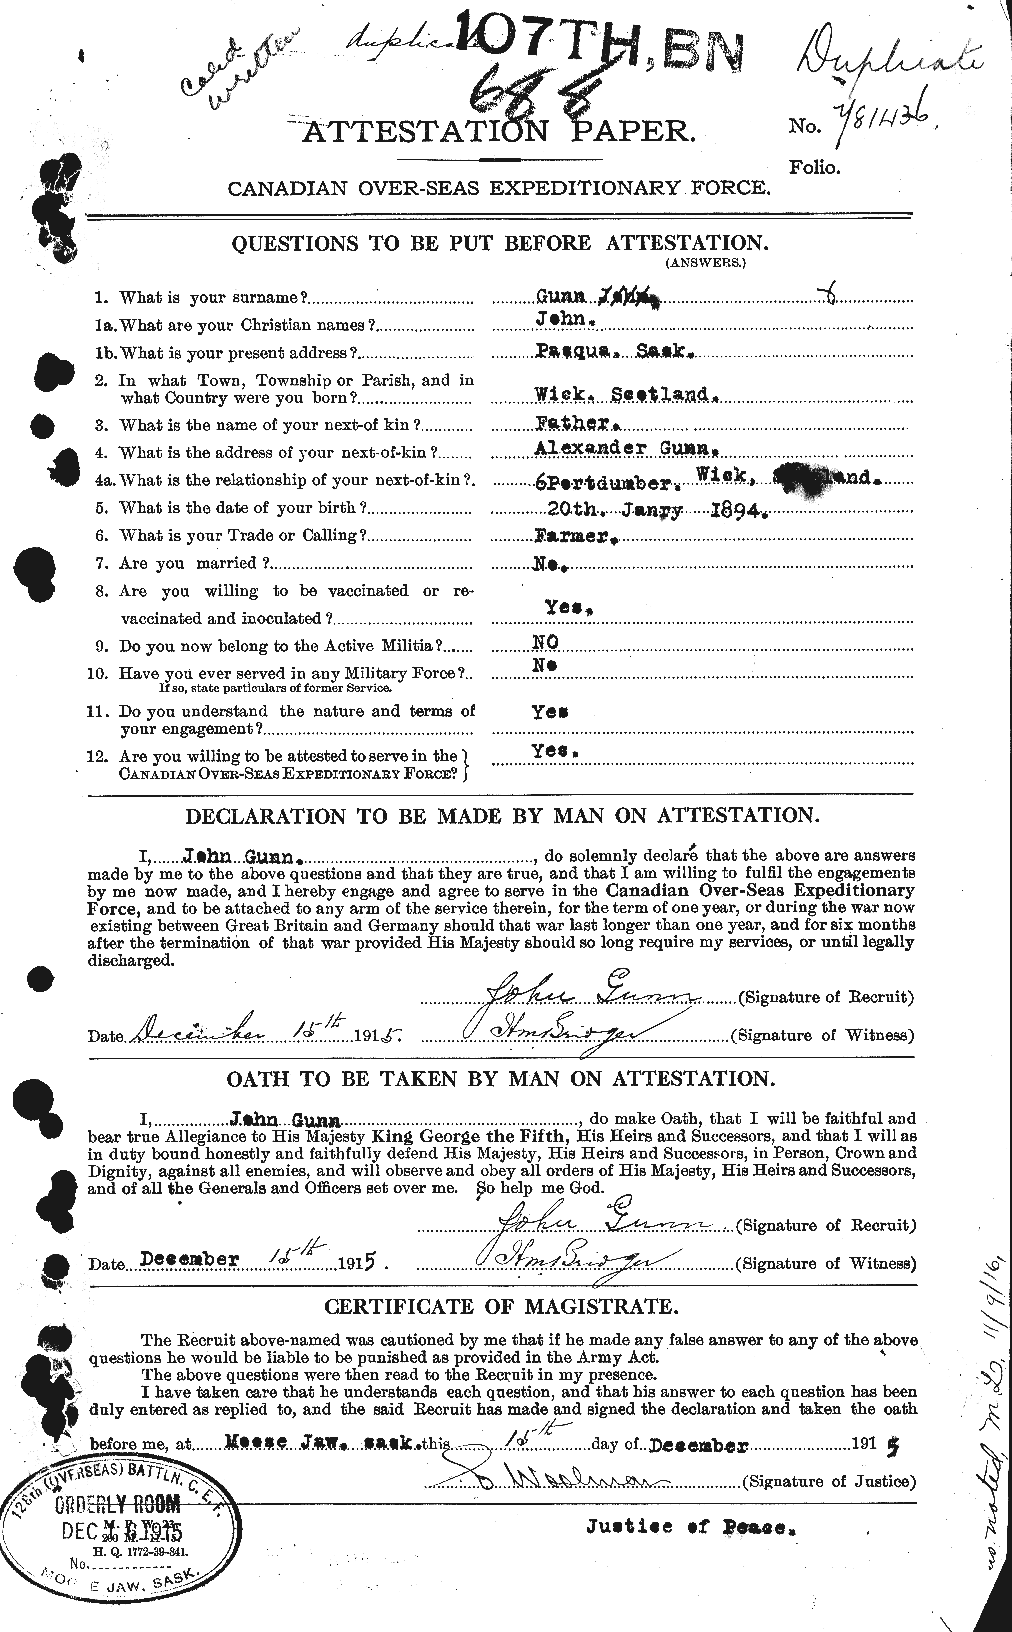 Personnel Records of the First World War - CEF 369283a